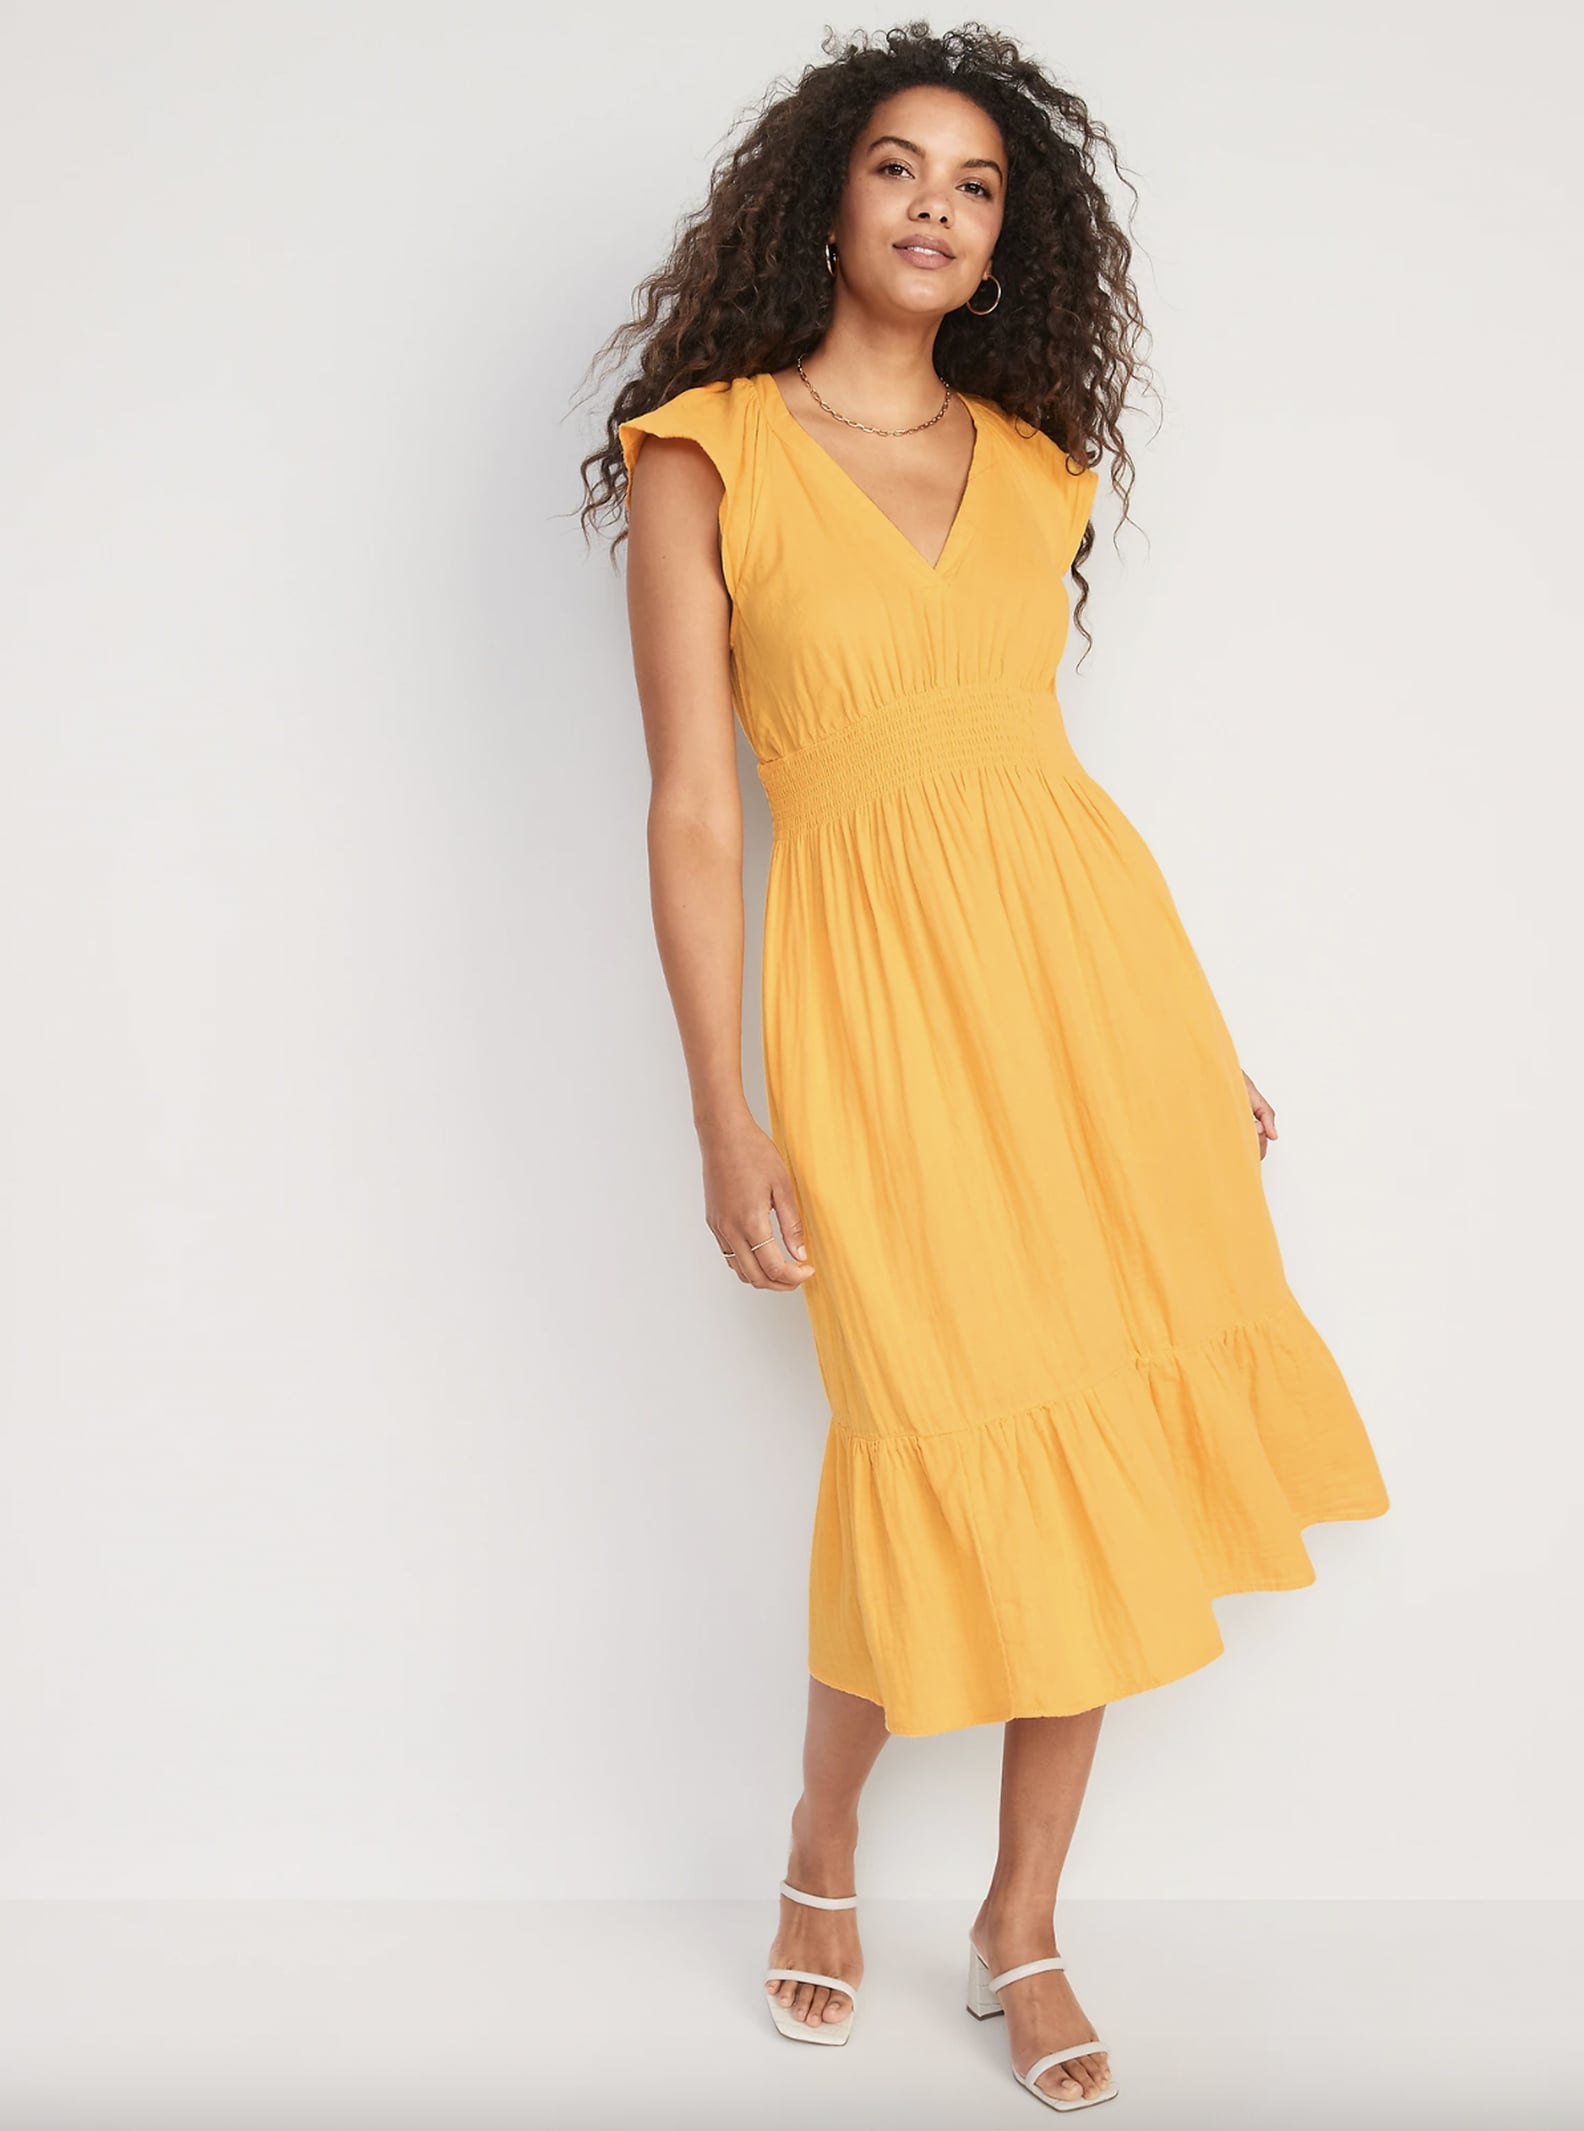 Channel Nap-Dress Vibes With These Sweet Midis and Maxis | POPSUGAR Fashion